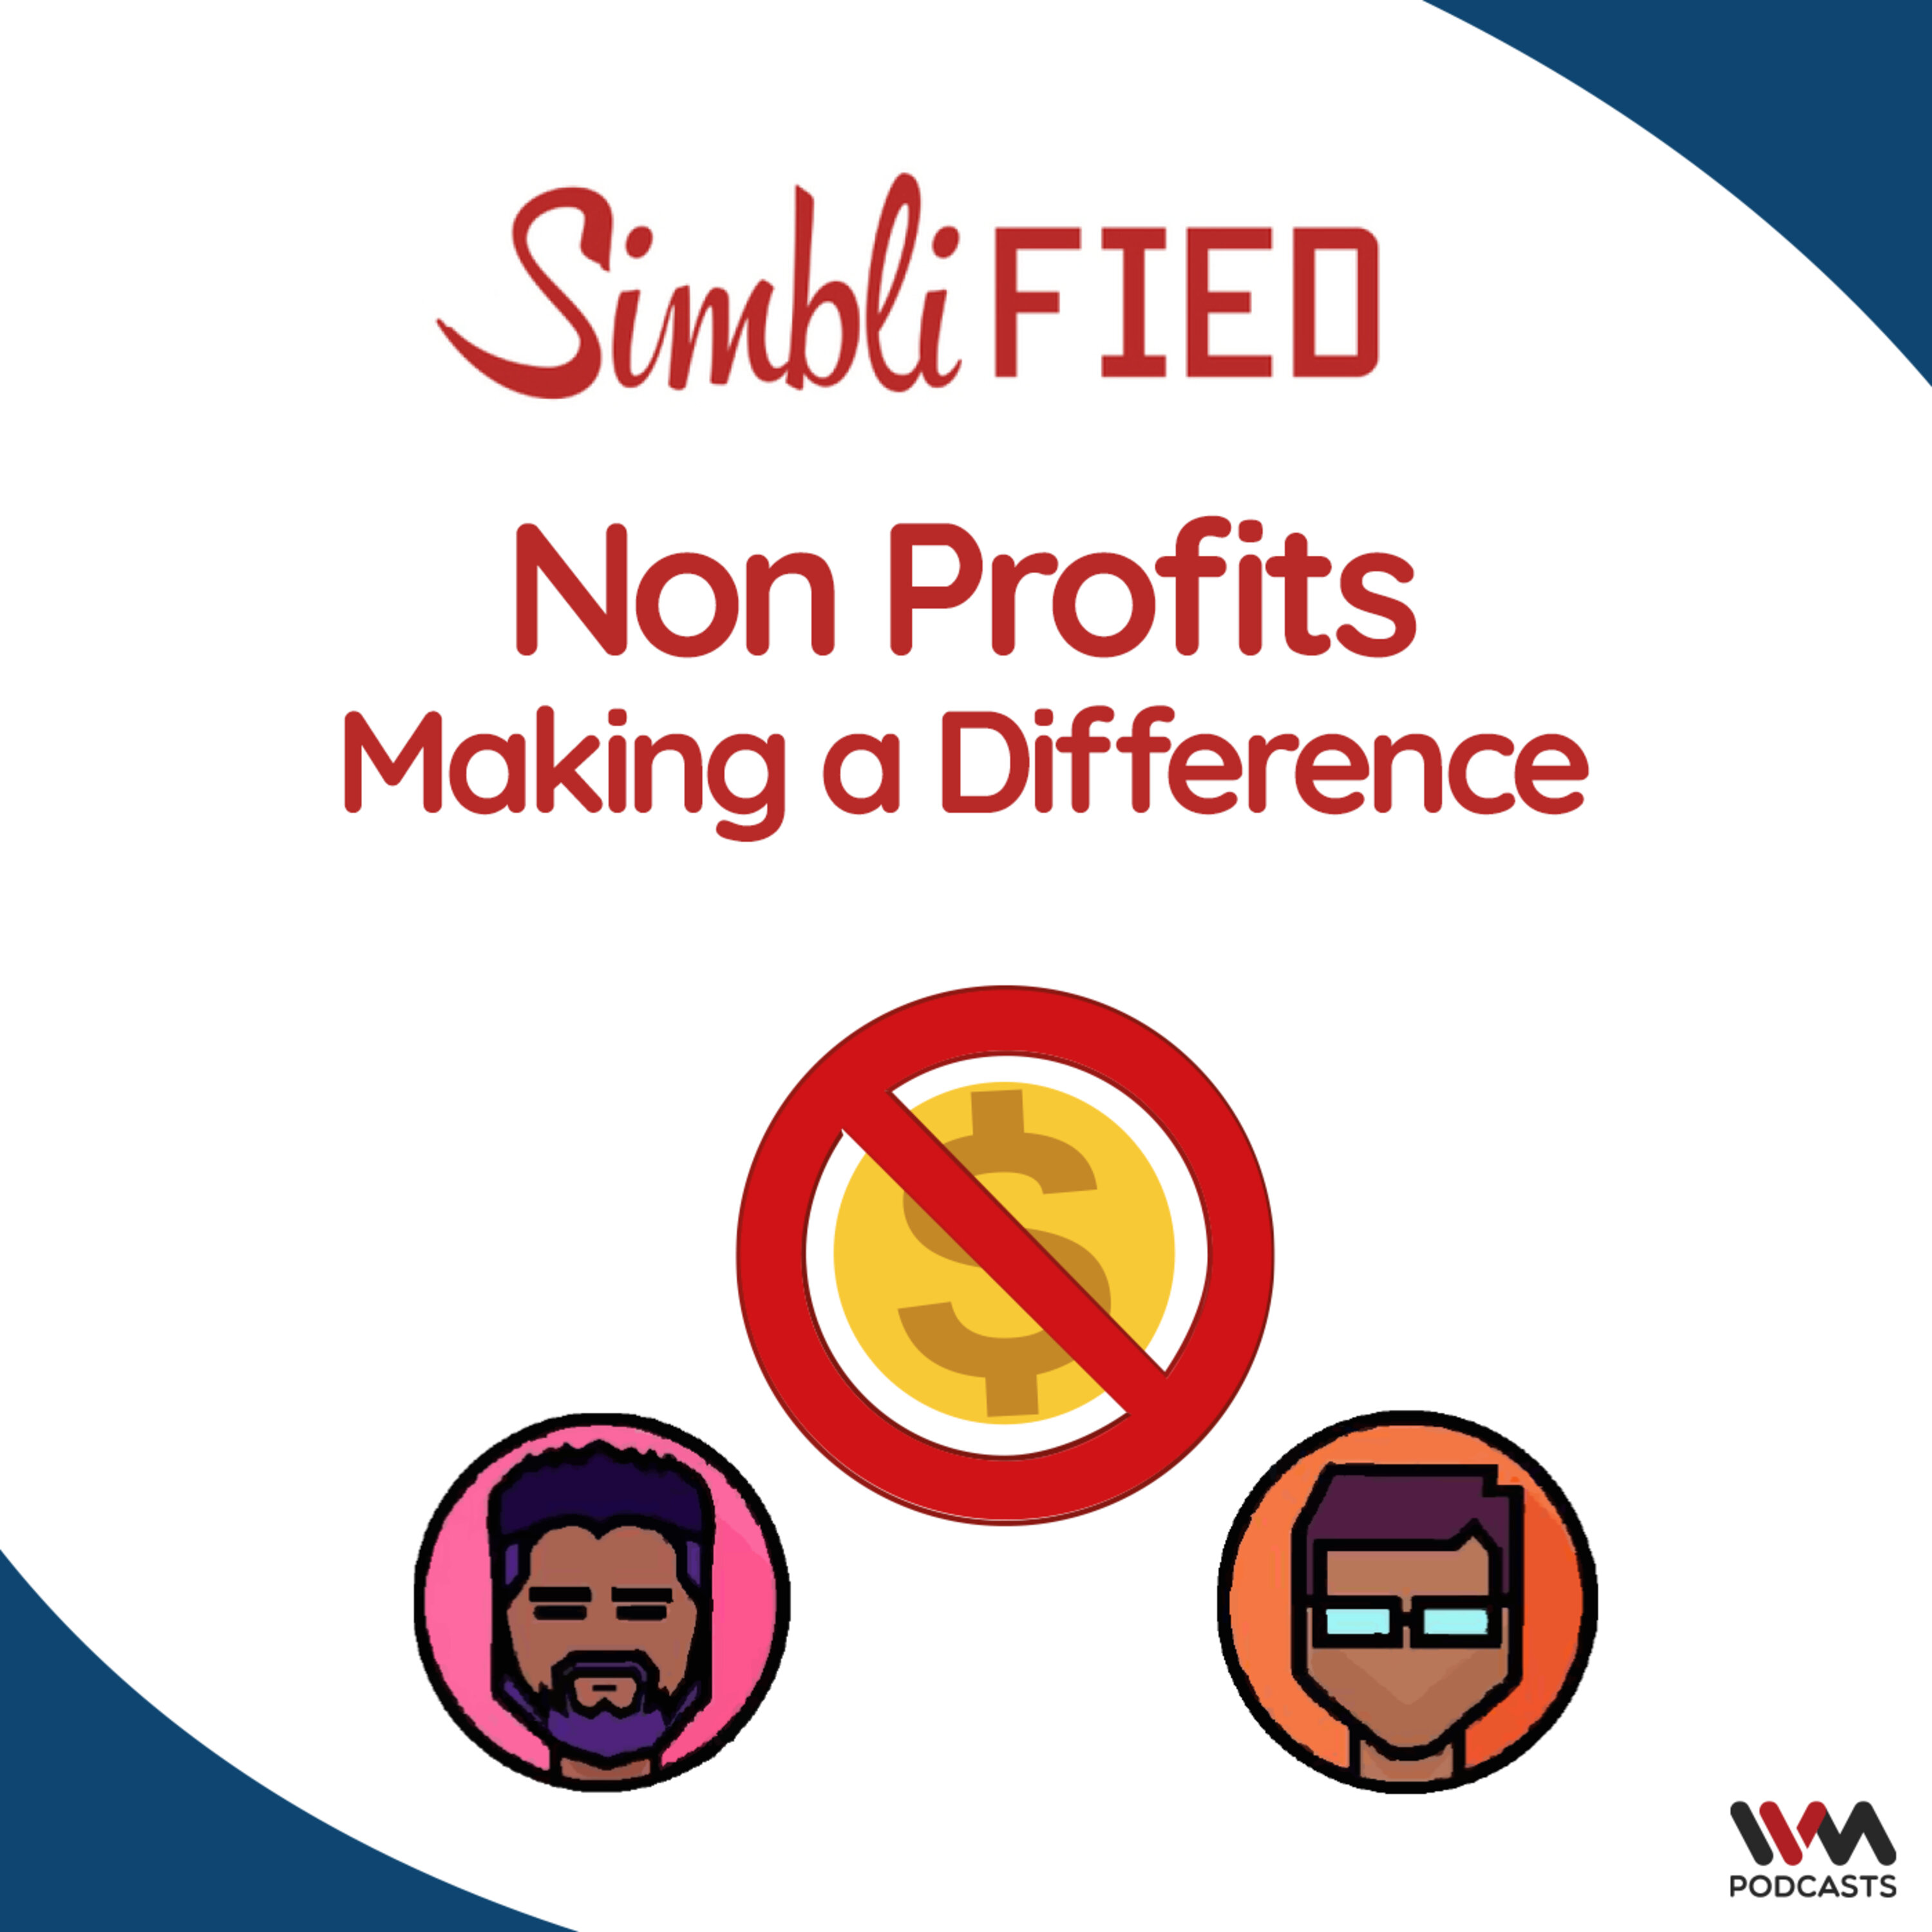 Non Profits - Making a Difference